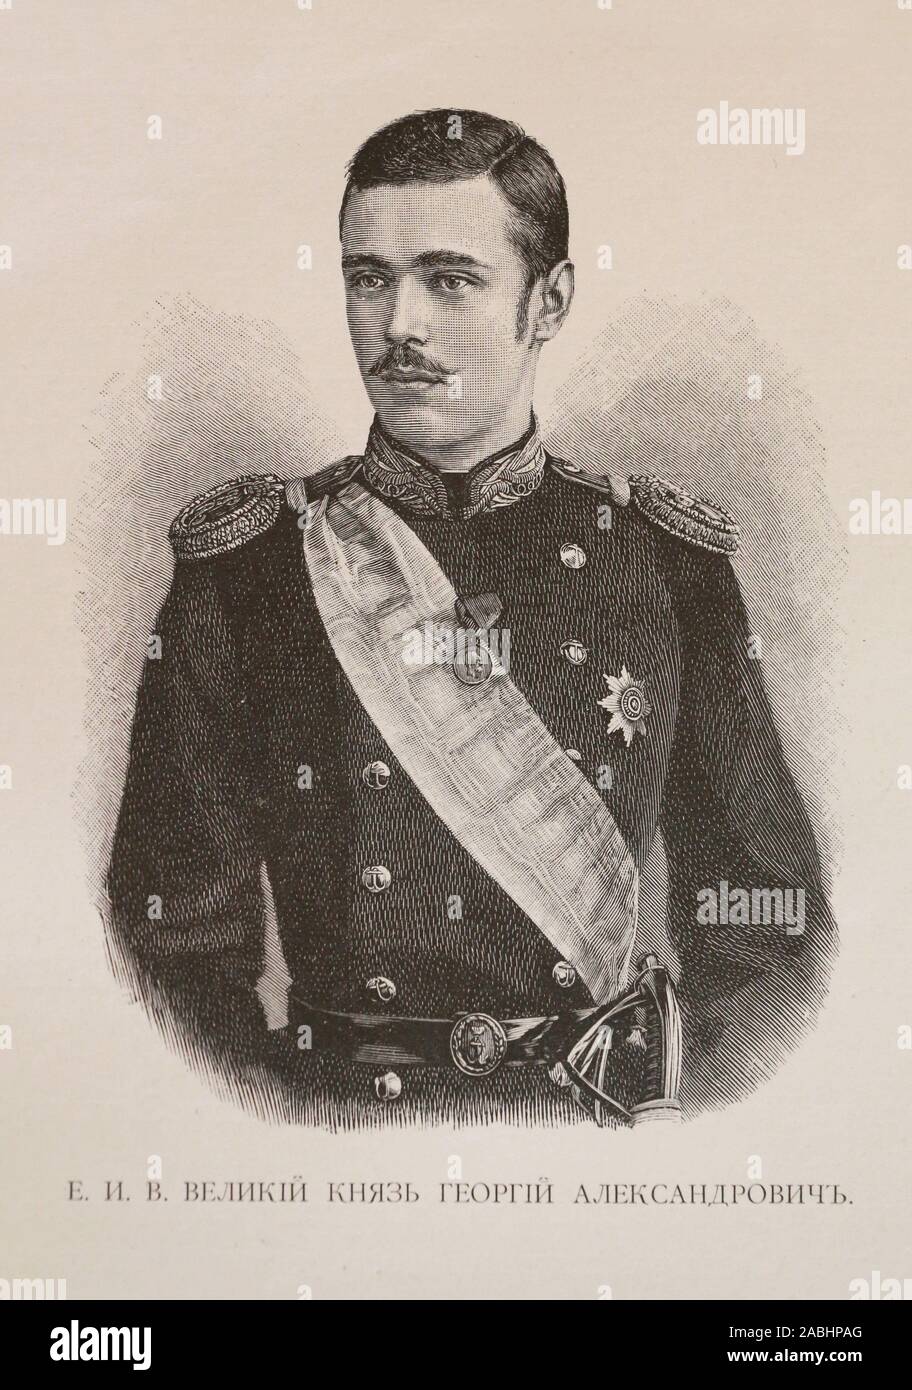 Grand Duke George Alexandrovich Romanov in his young years. Grand Duke George Alexandrovich of Russia was the third son of Emperor Alexander III and Empress Marie of Russia. At times he was referred to by his relatives as 'weeping willow' and was a much beloved member of the imperial family. Stock Photo